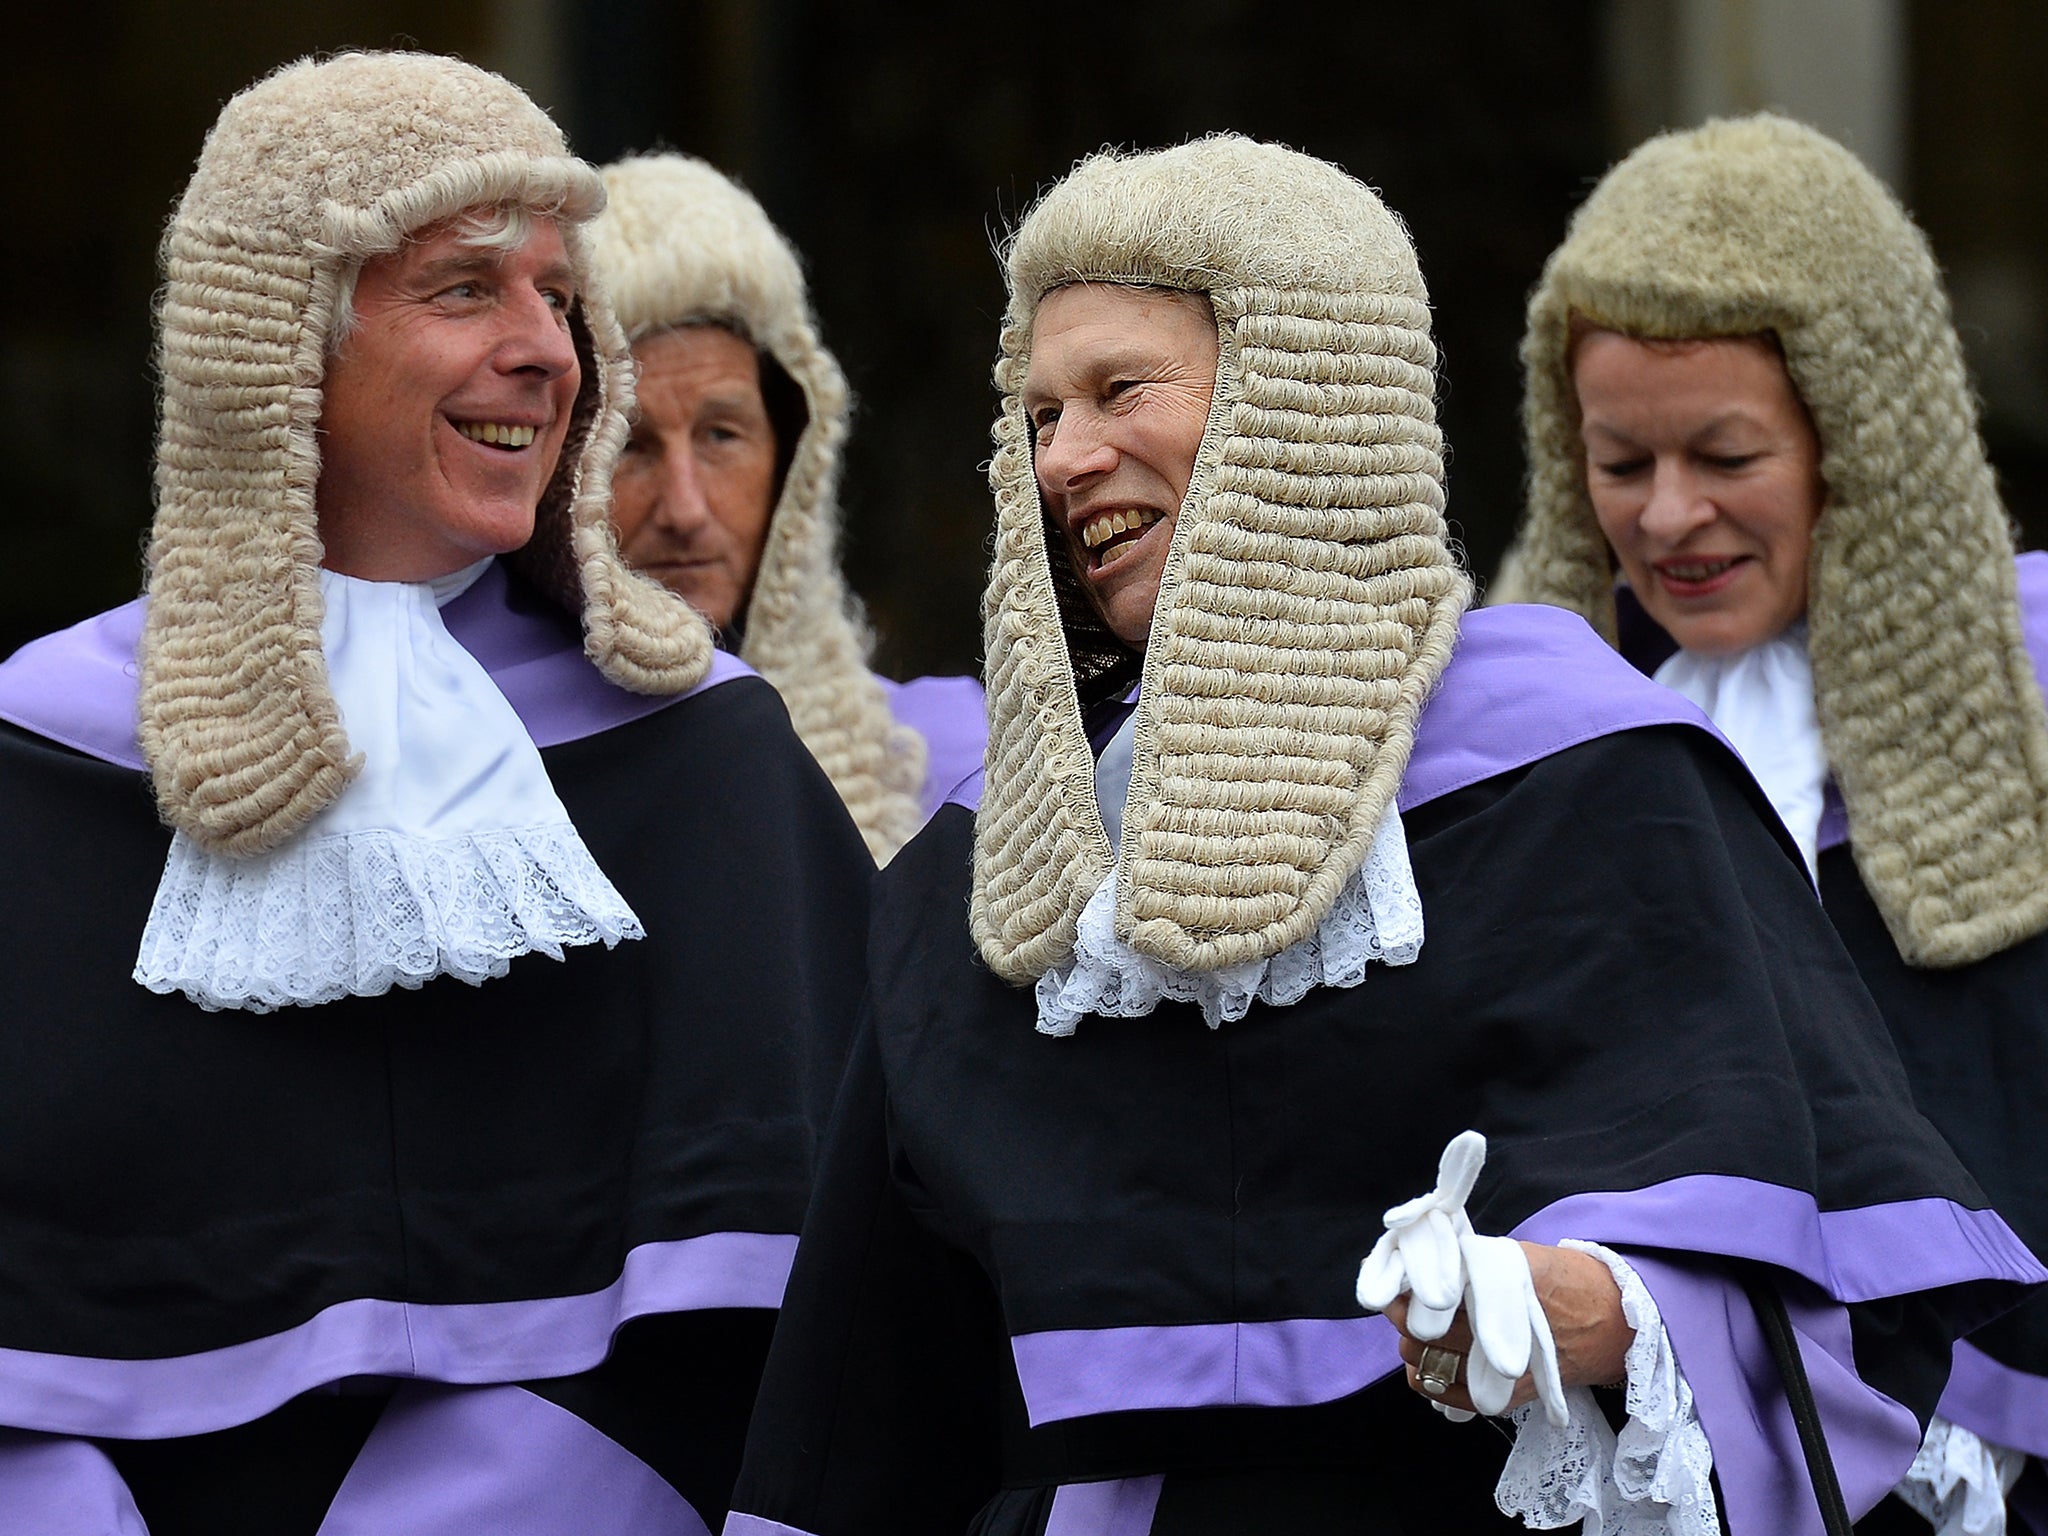 Earlier this year Britain’s only female Supreme Court judge called for more gender equality